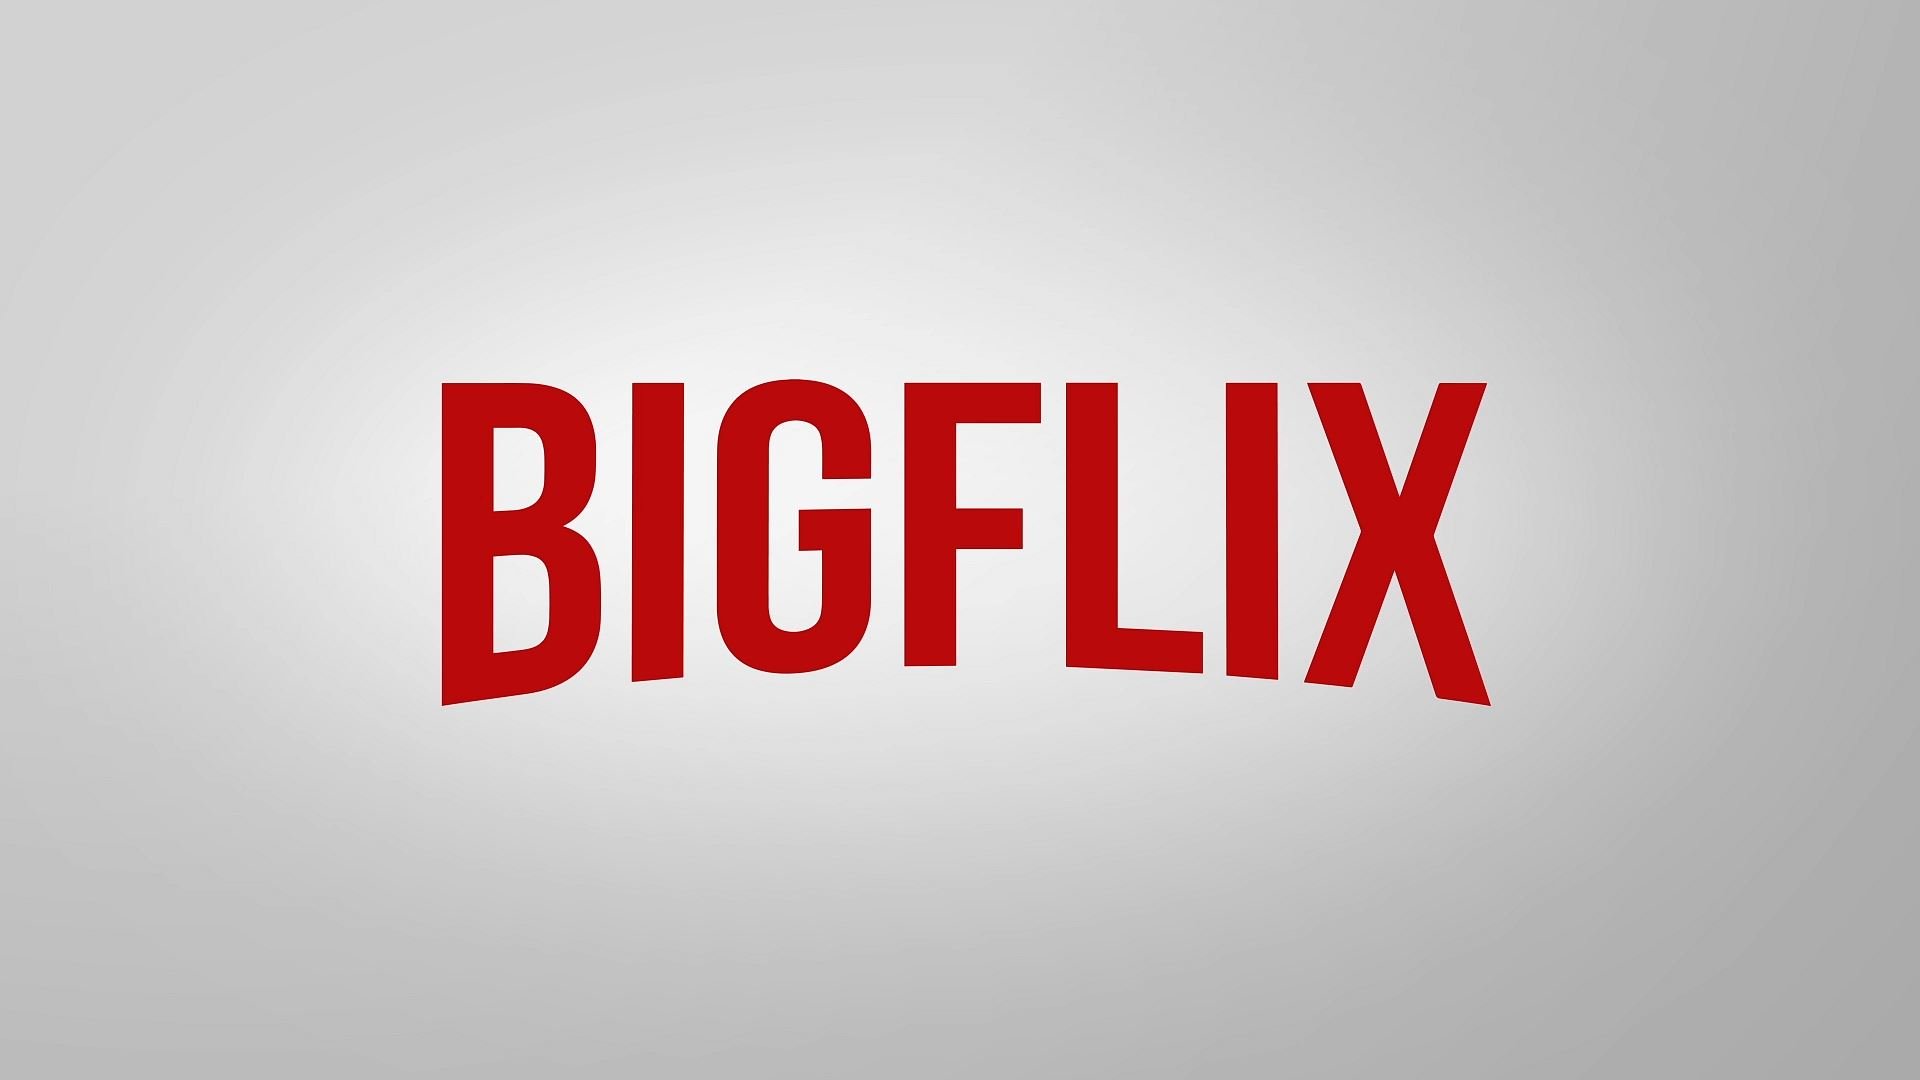 More information about "BIGFLIX Startup Video"